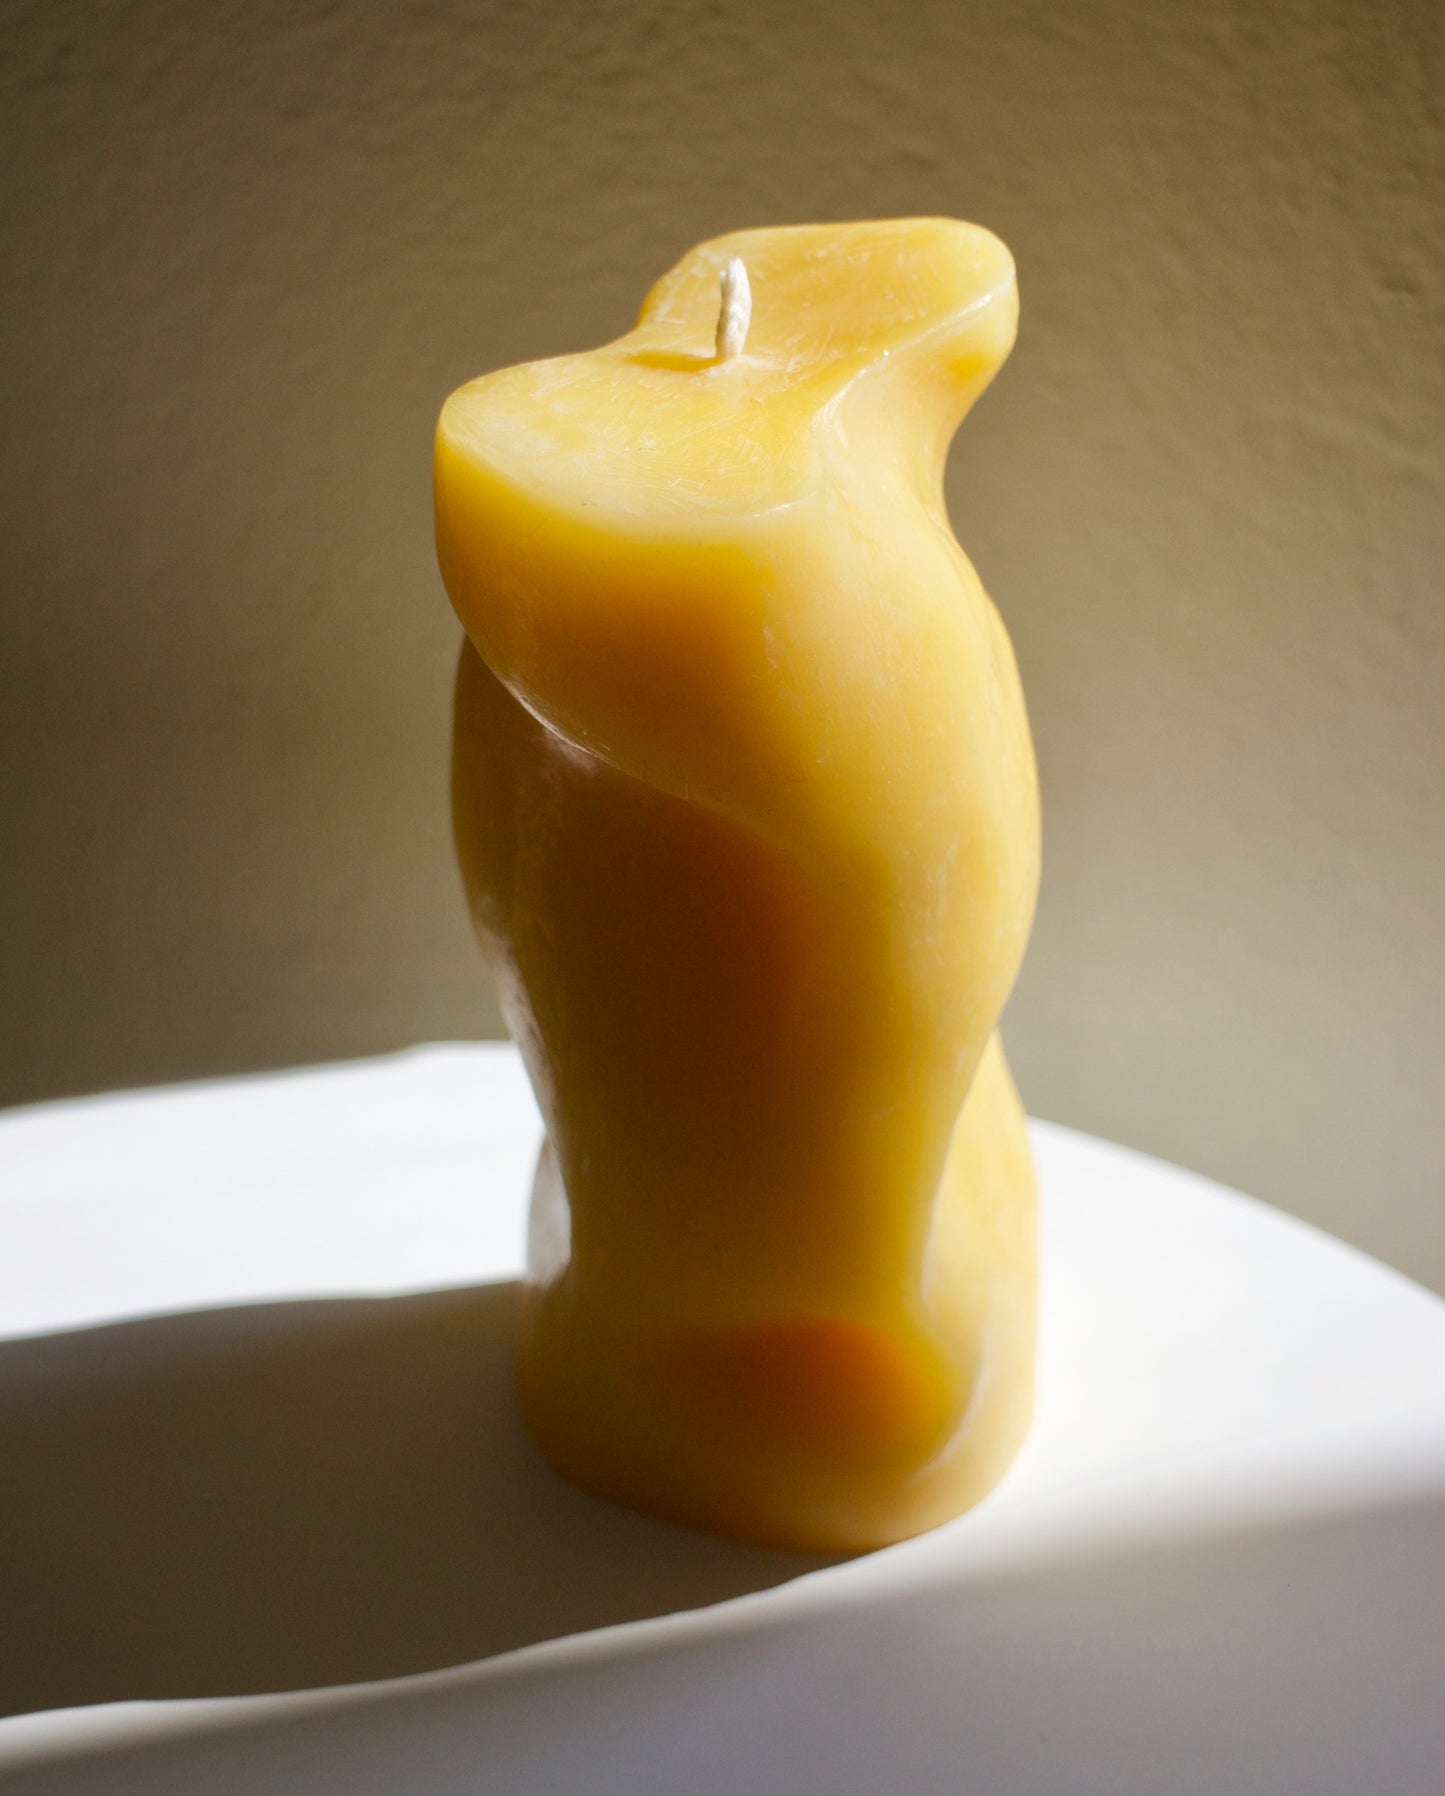 Dancing Candle 03 – Yellow or White Beeswax